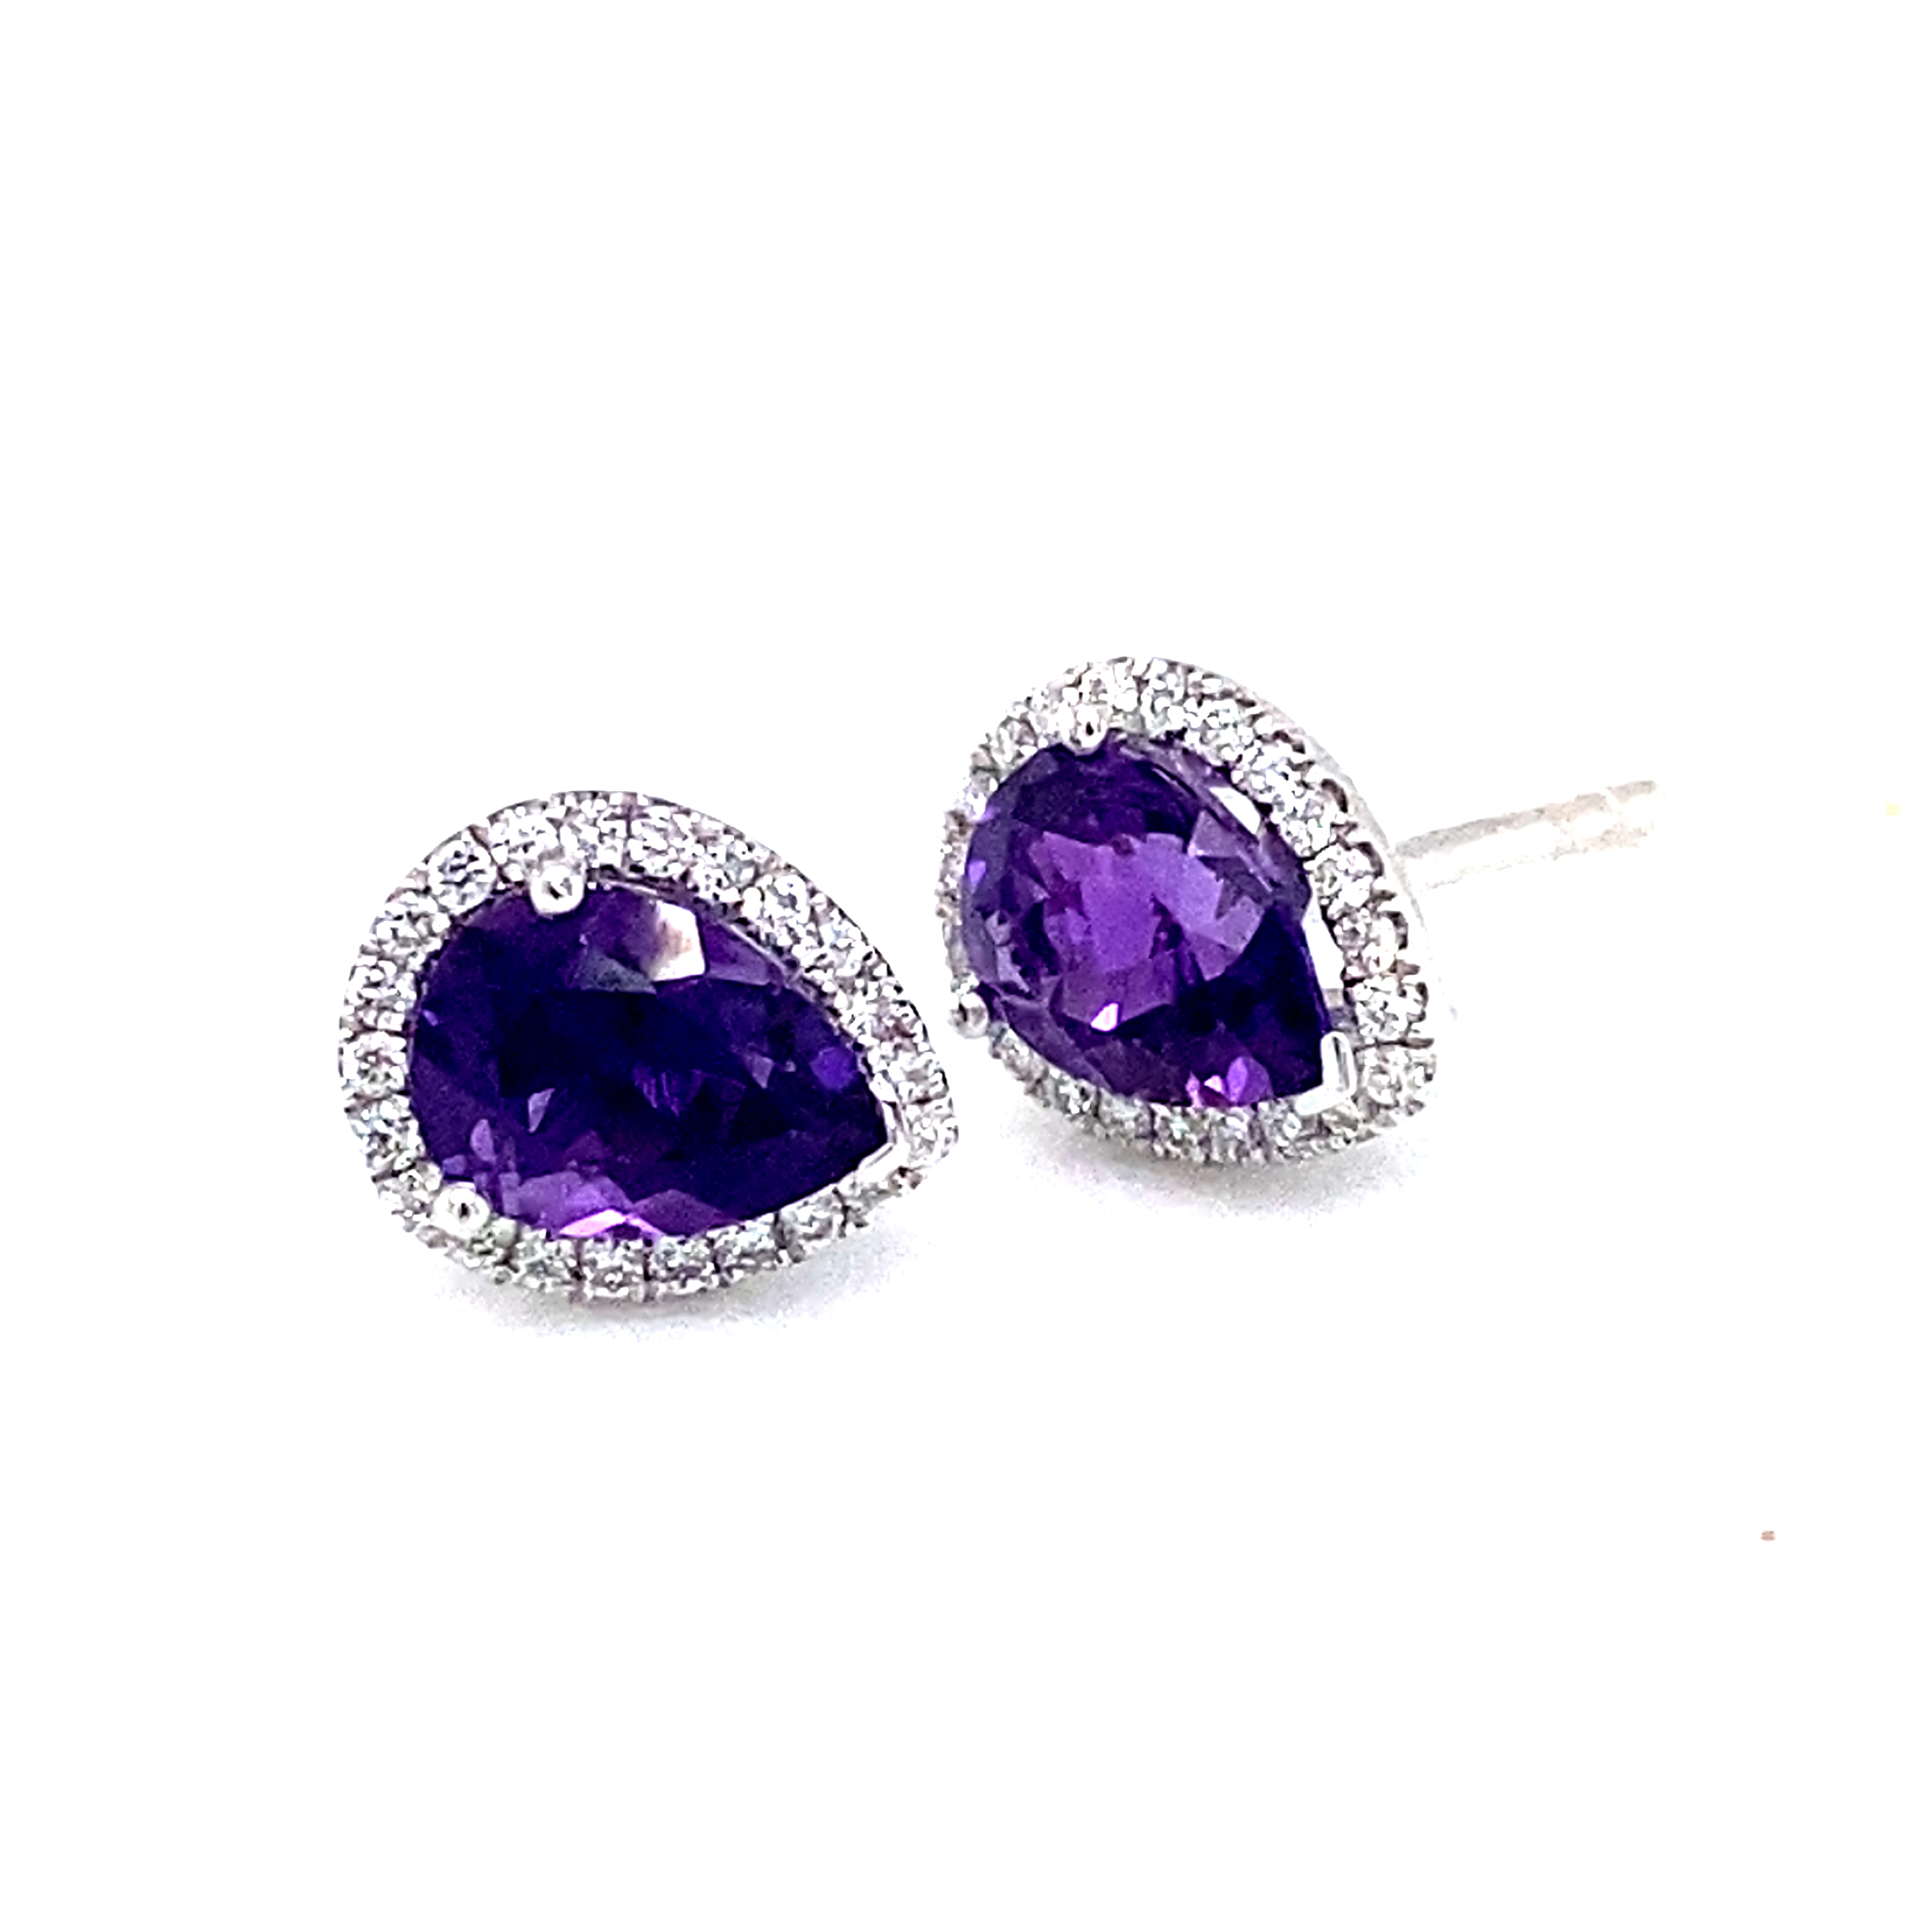 A Pair of 18 Carat White Gold, Amethyst and Diamond Studs